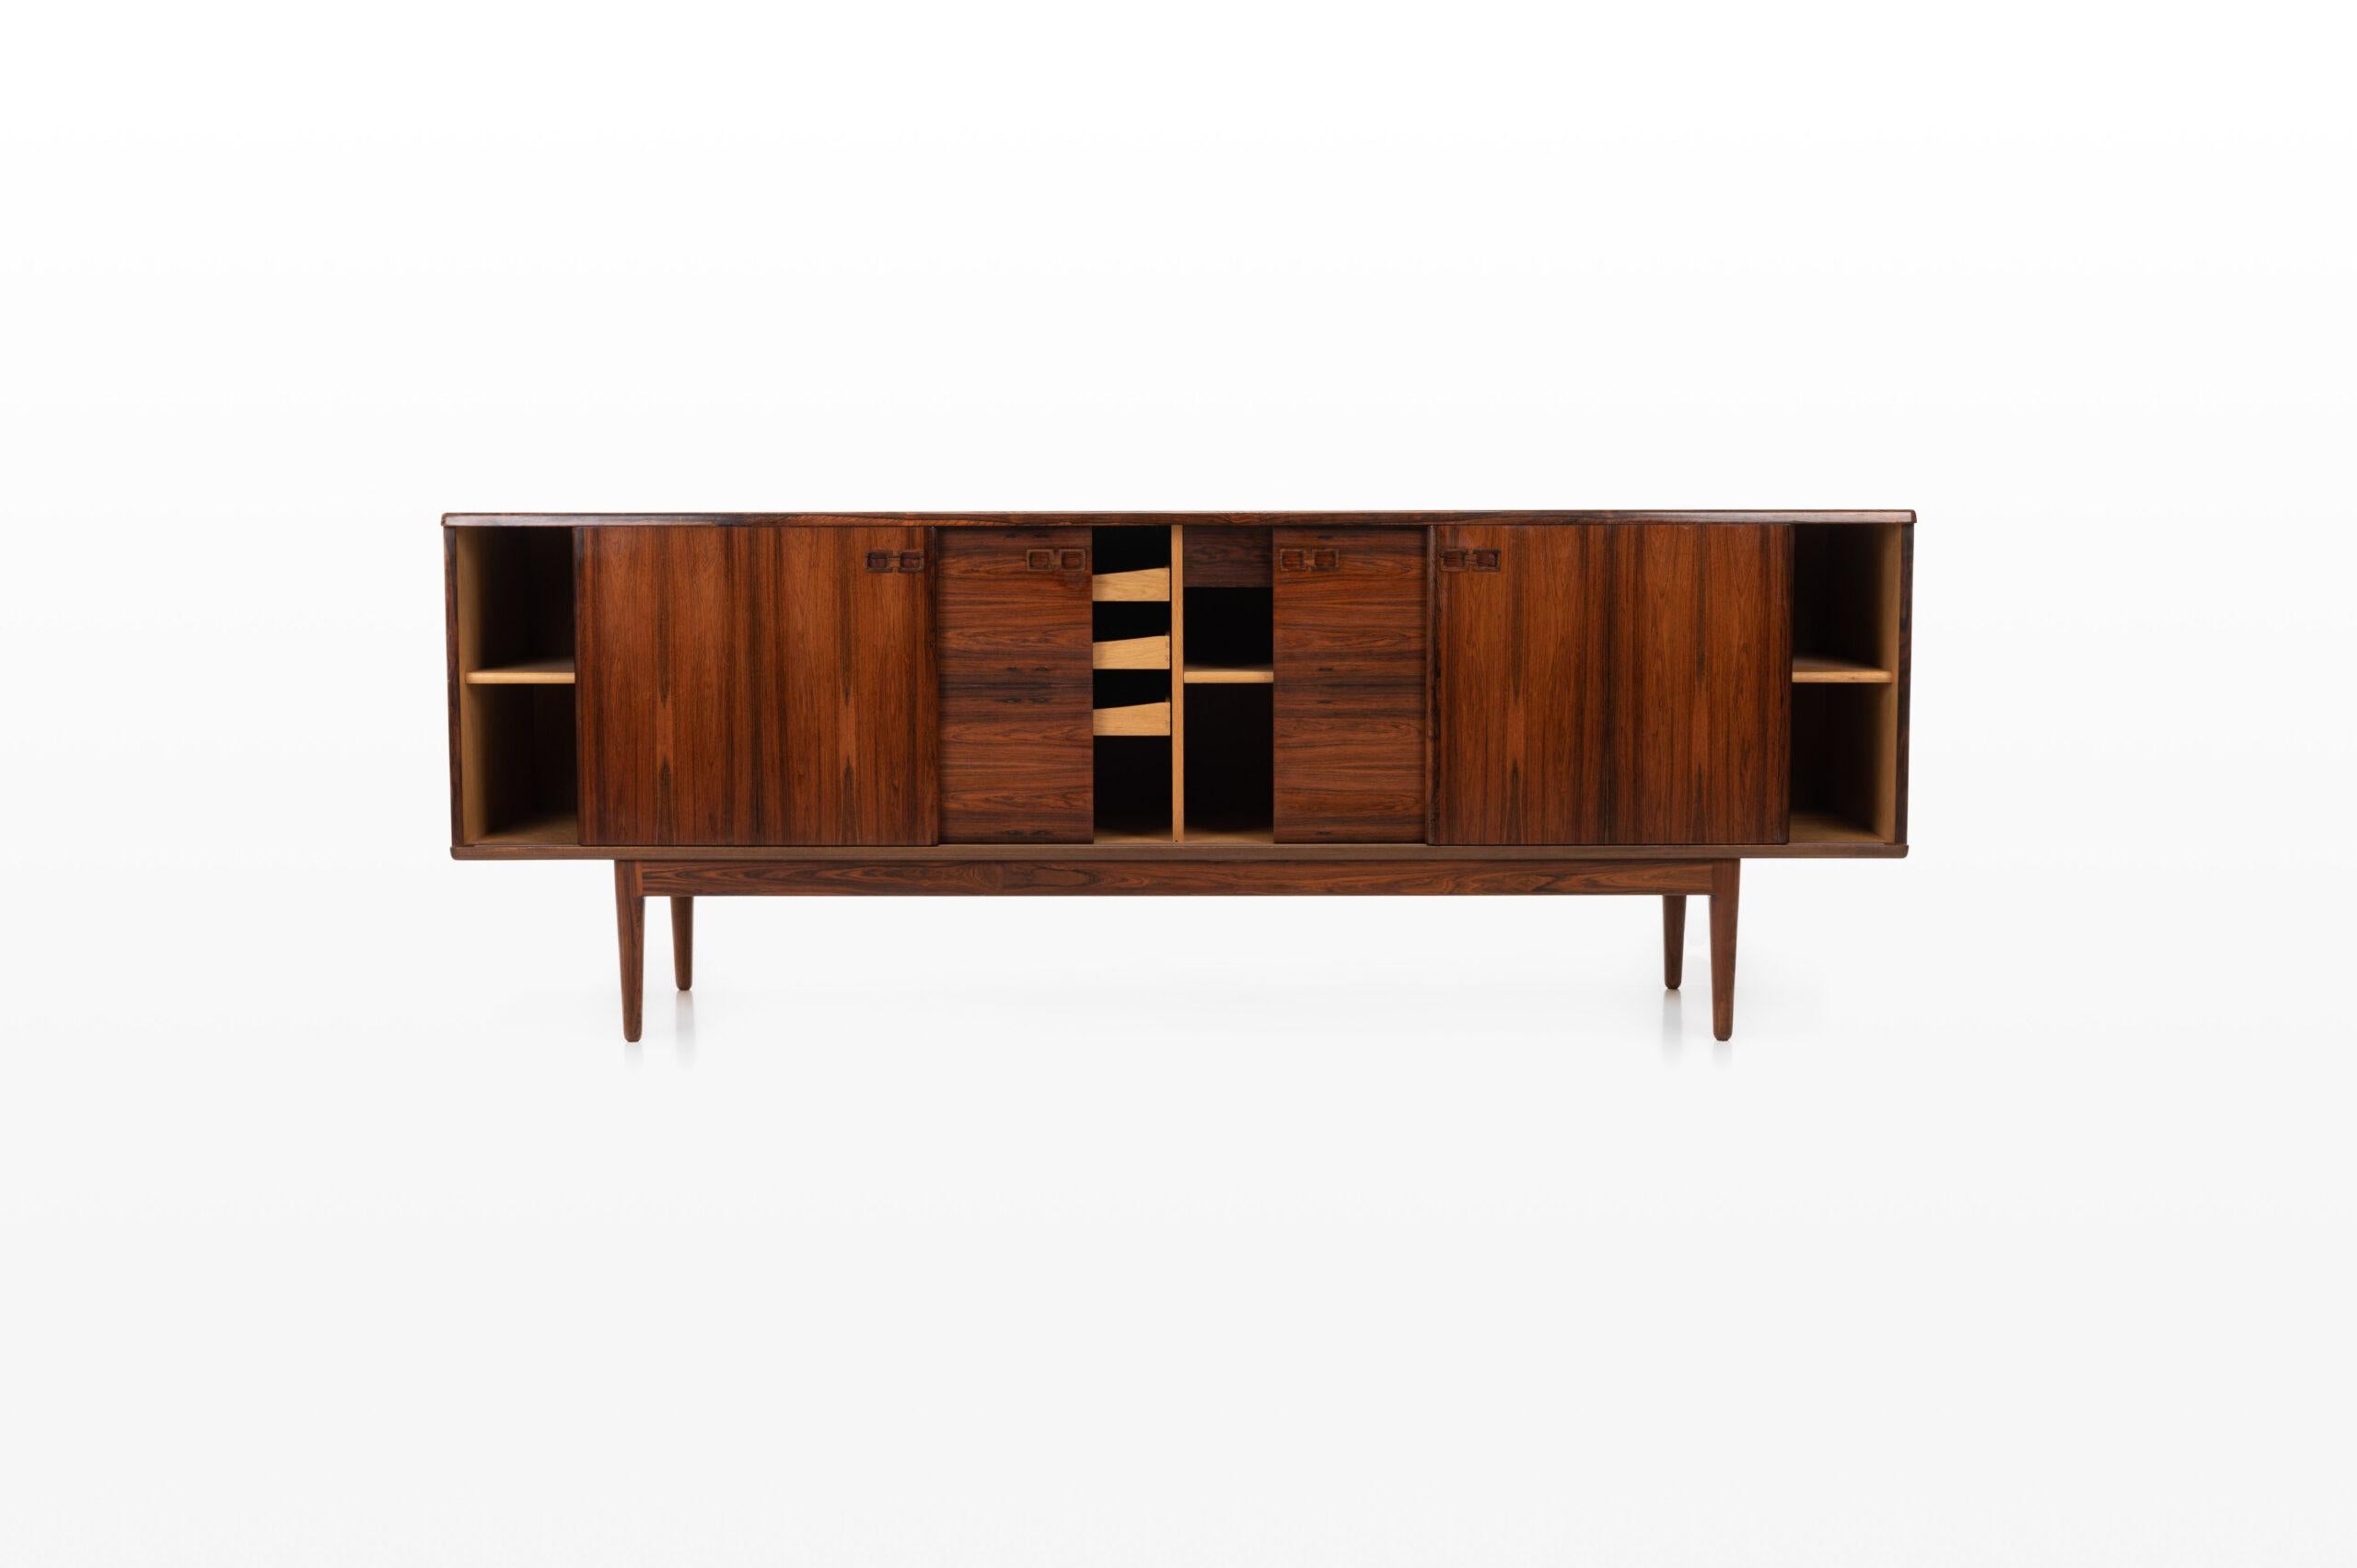 Beautiful sideboard designed and produced by Christian Linneberg for Christian Linnebergs Møbelfabrik. The sideboard is finished in rosewood and on the inside in oak, very high quality. There are four sliding doors, four inner drawers and plenty of